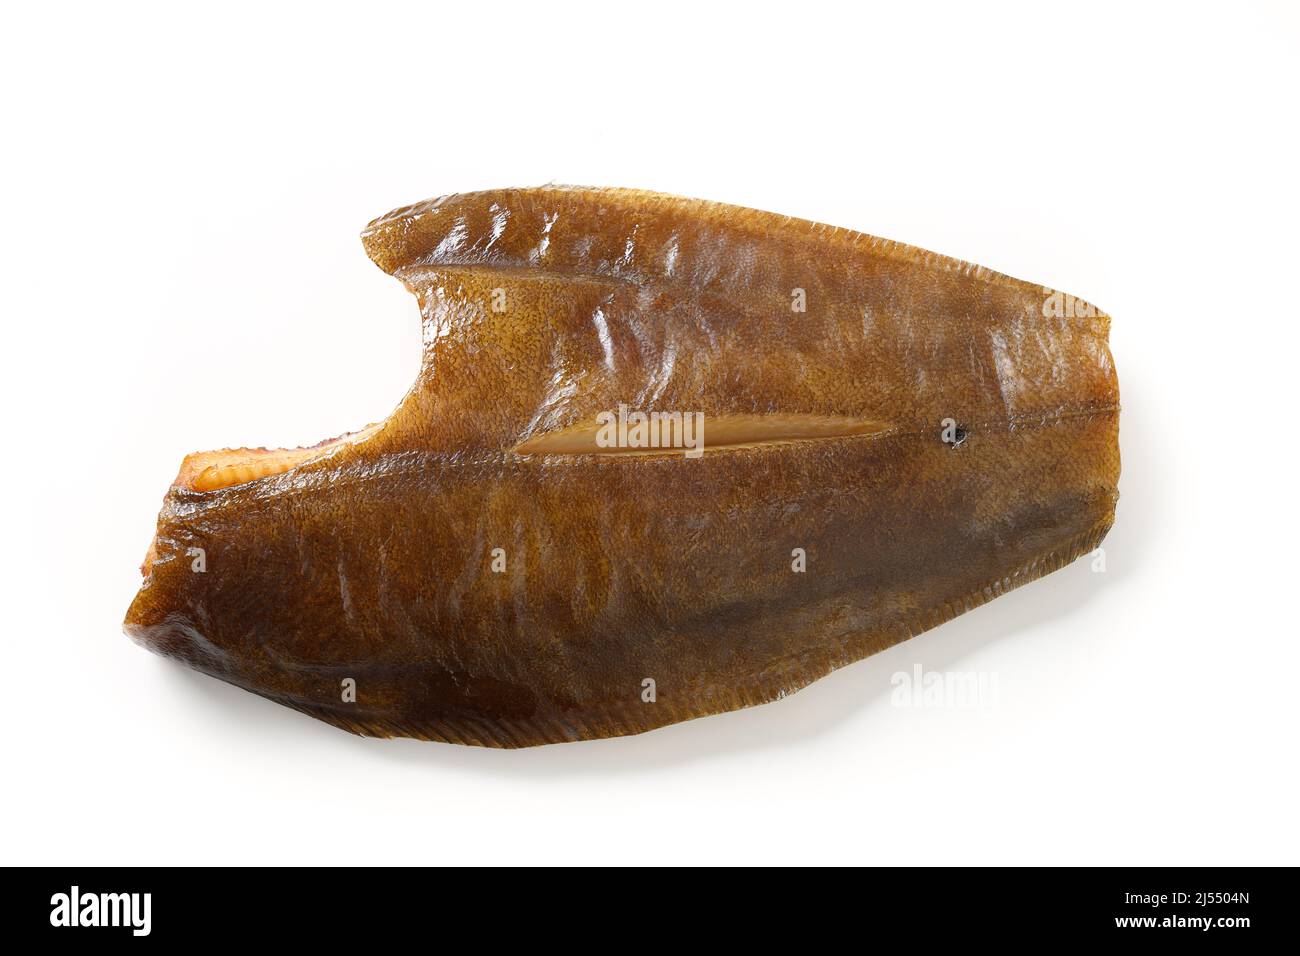 Atlantic salted whole smoked halibut isolated on white background. View from above. Stock Photo